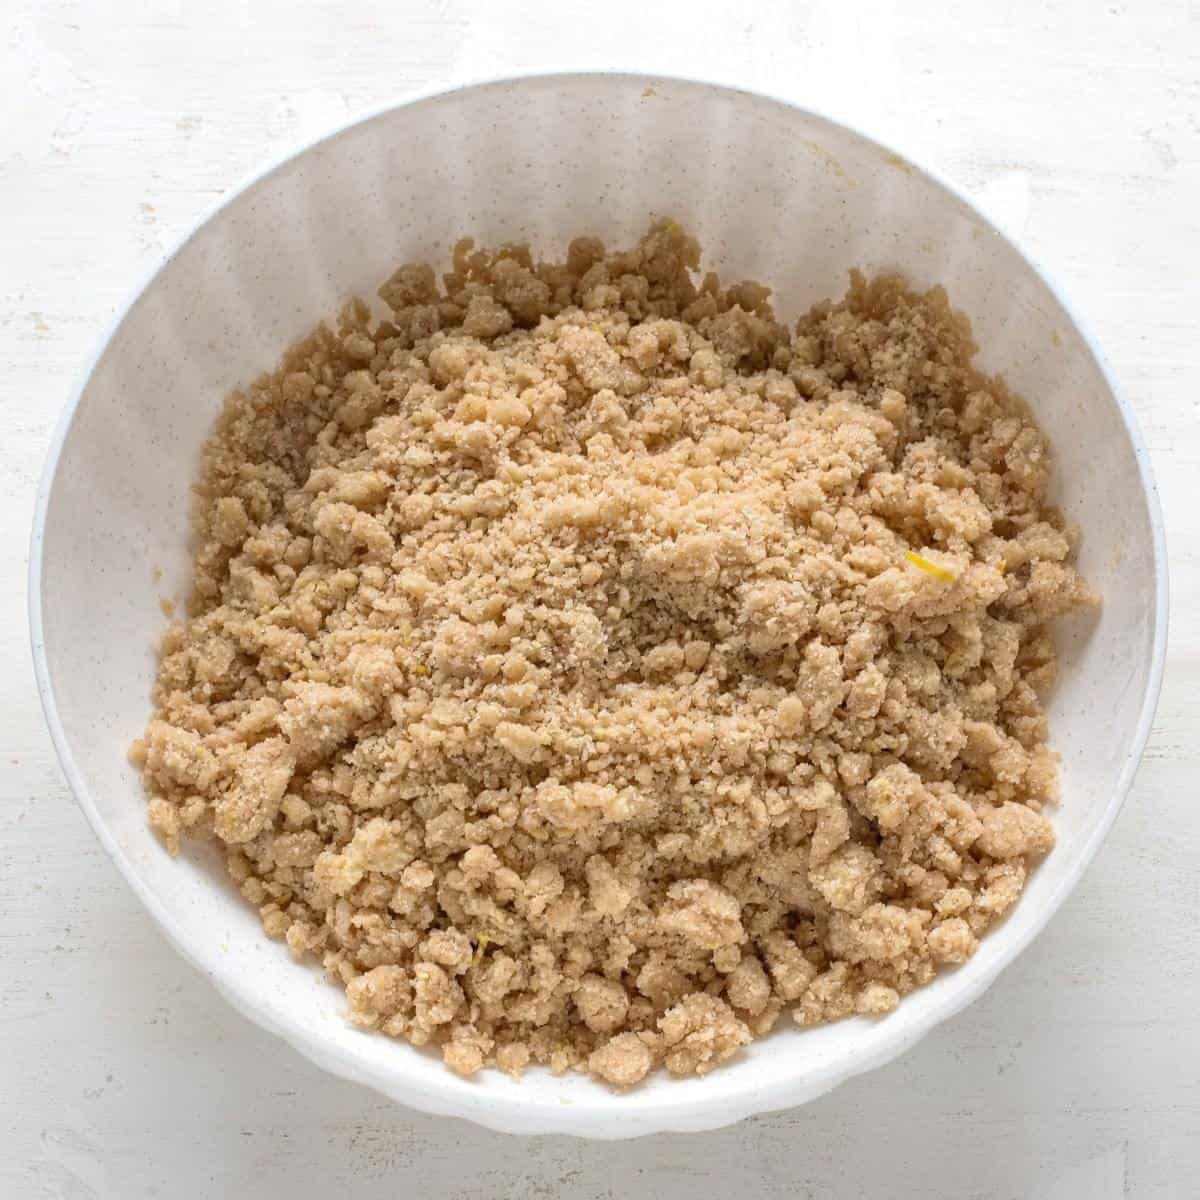 Soft crumbs for making apple crumb cake, in a white mixing bowl.